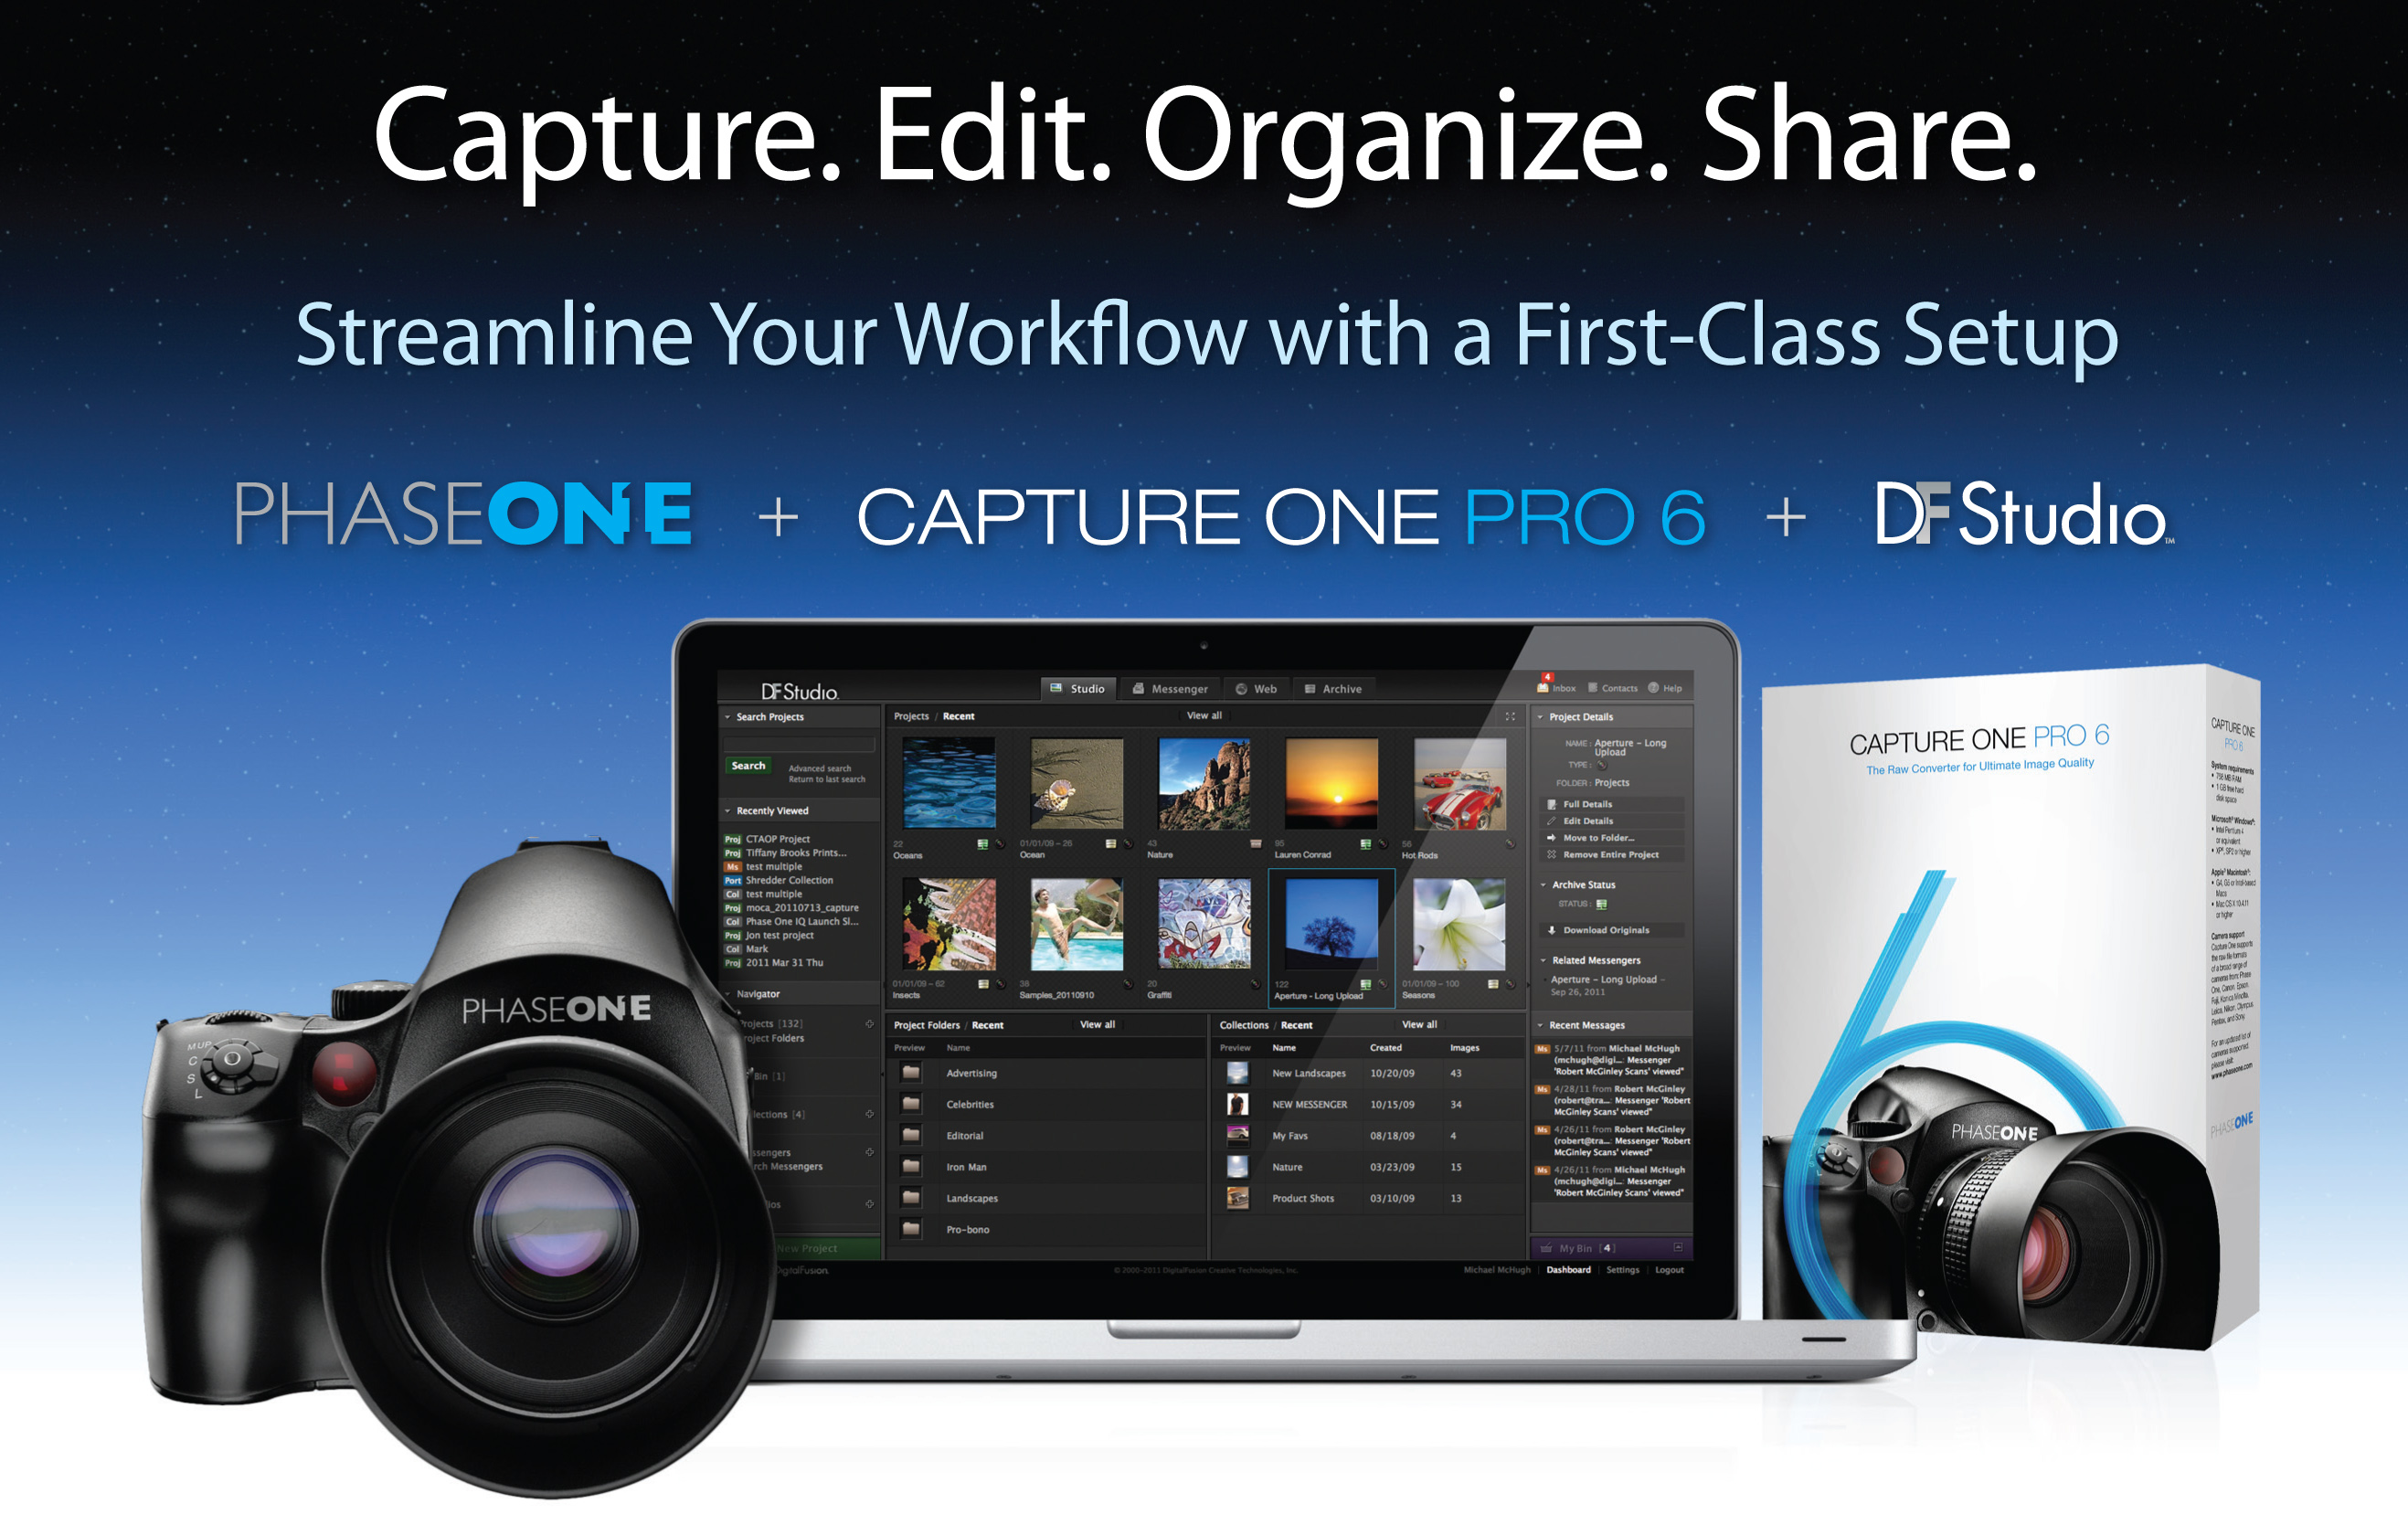 Photo Contest -  Still time for   Phase One and DF Studio "Streamline Your Workflow Contest"